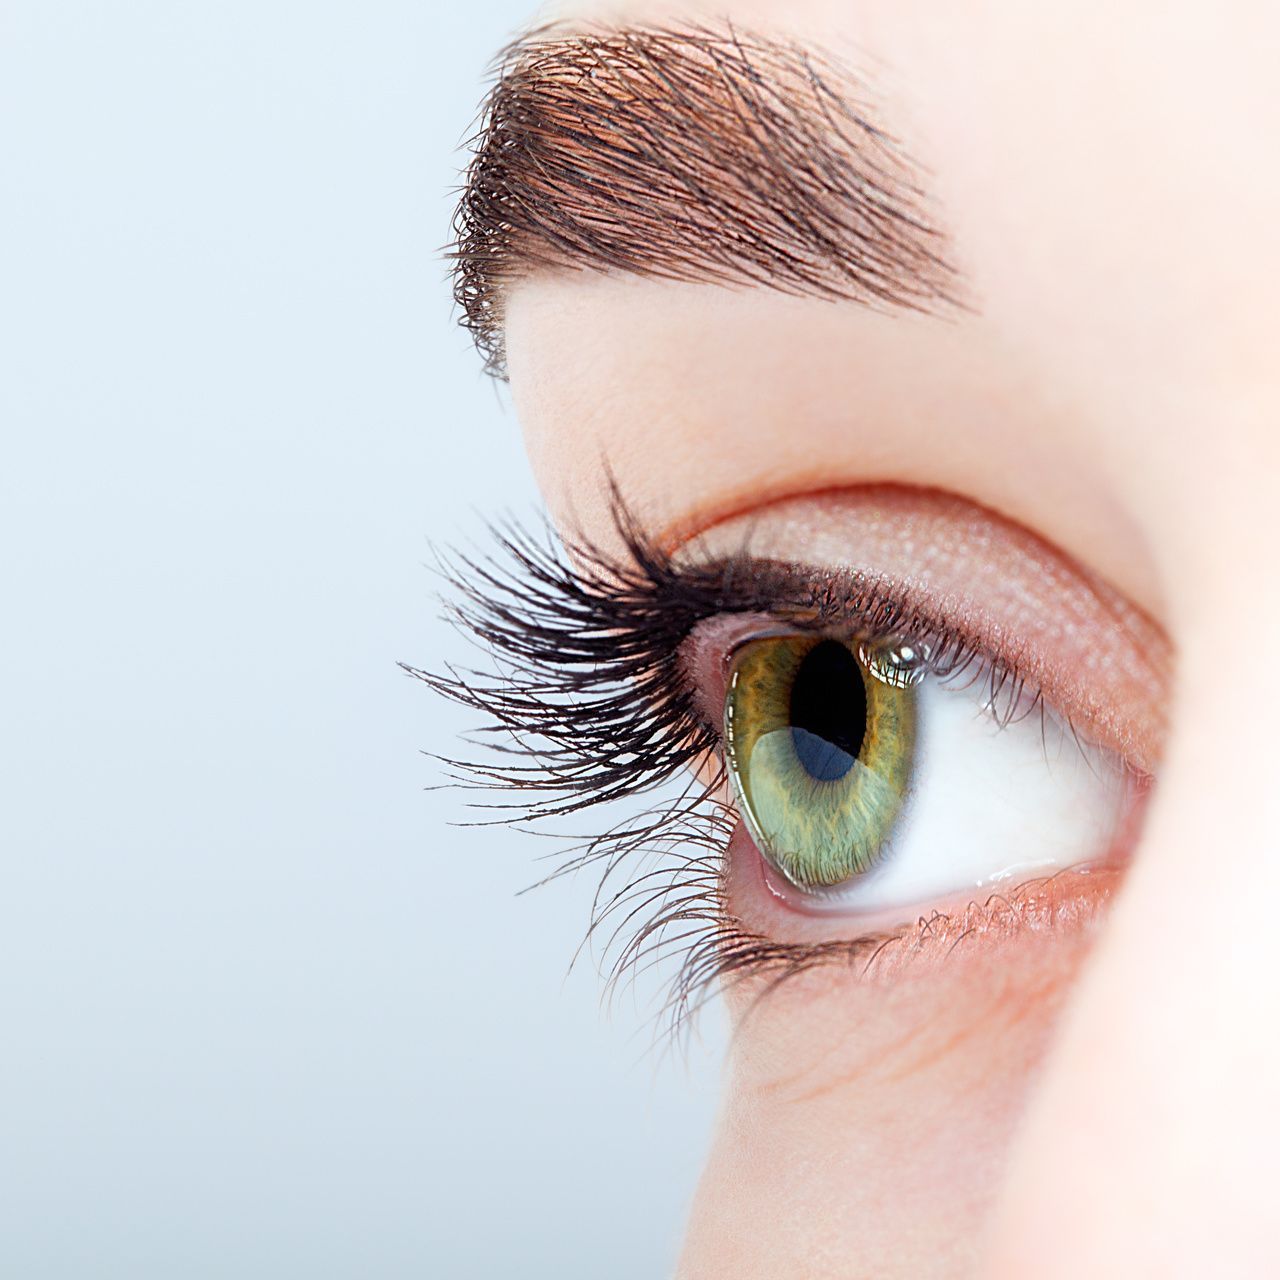 Metformin, Lifestyle Changes Not Associated With Risk of AMD